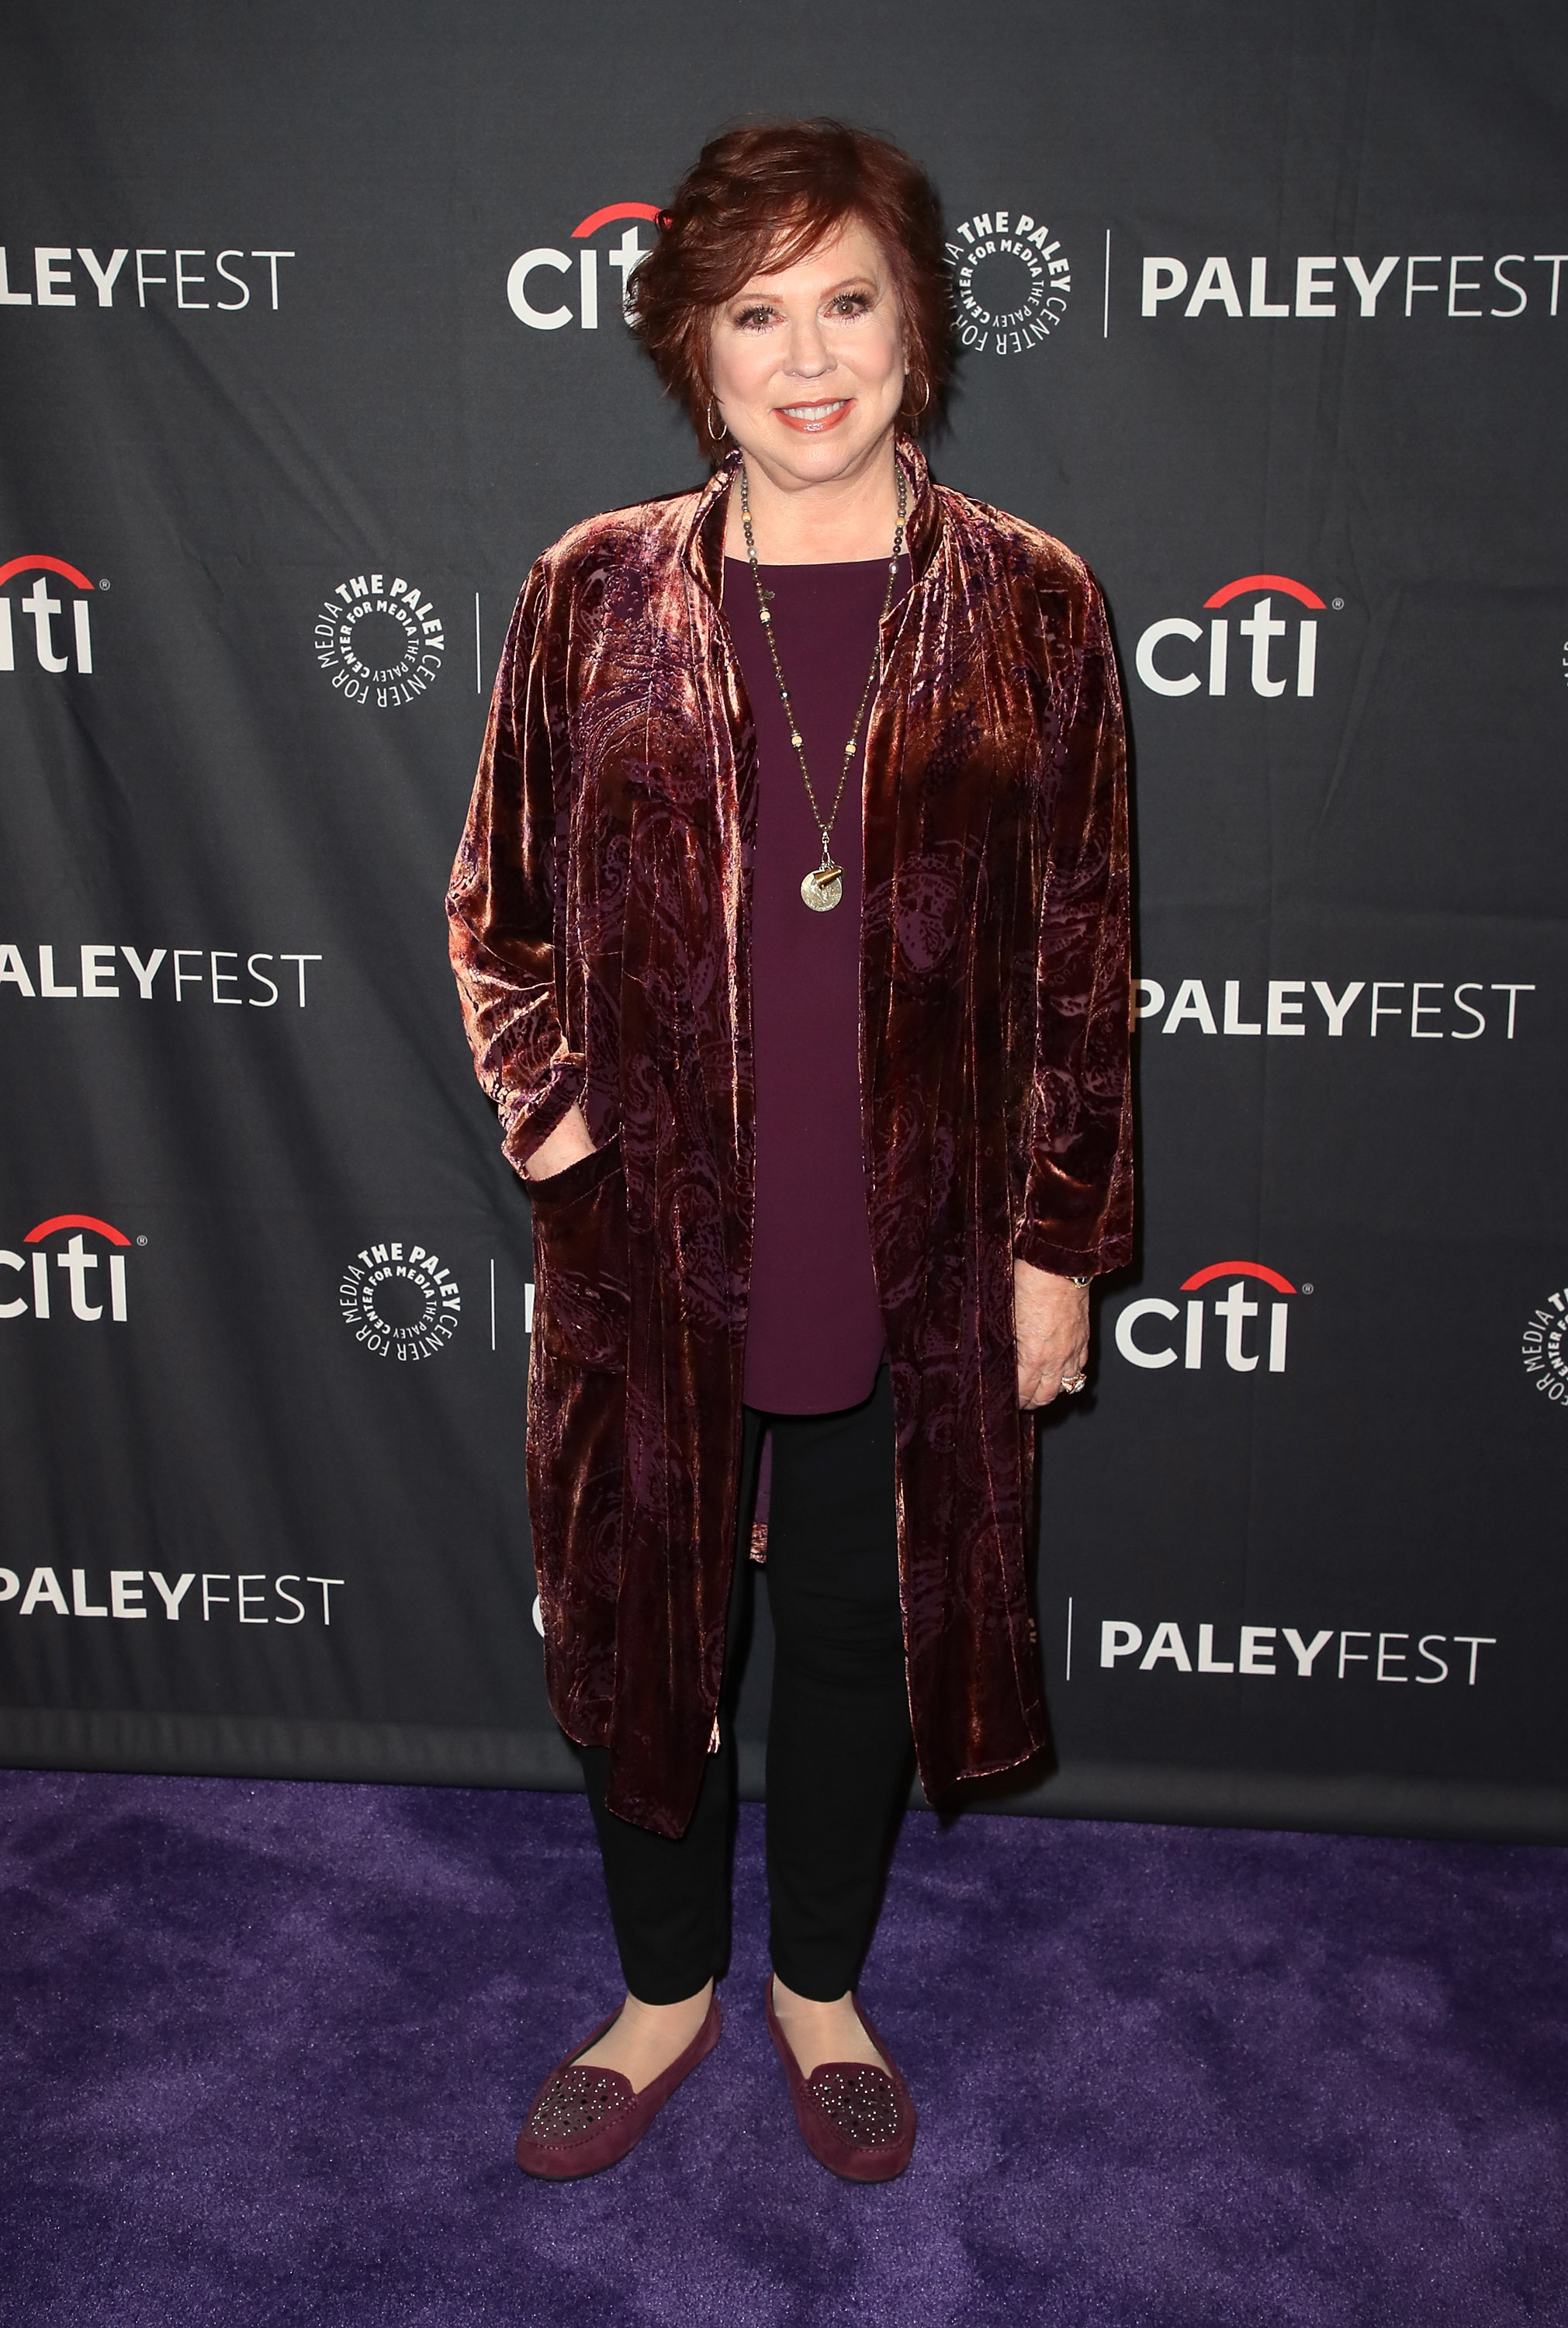 Vicki Lawrence from 'The Cool Kids' attends The Paley Center for Media's PaleyFest Fall TV Previews - Fox at The Paley Center for Media in Beverly Hills, California, on September 13, 2018. | Source: Getty Images